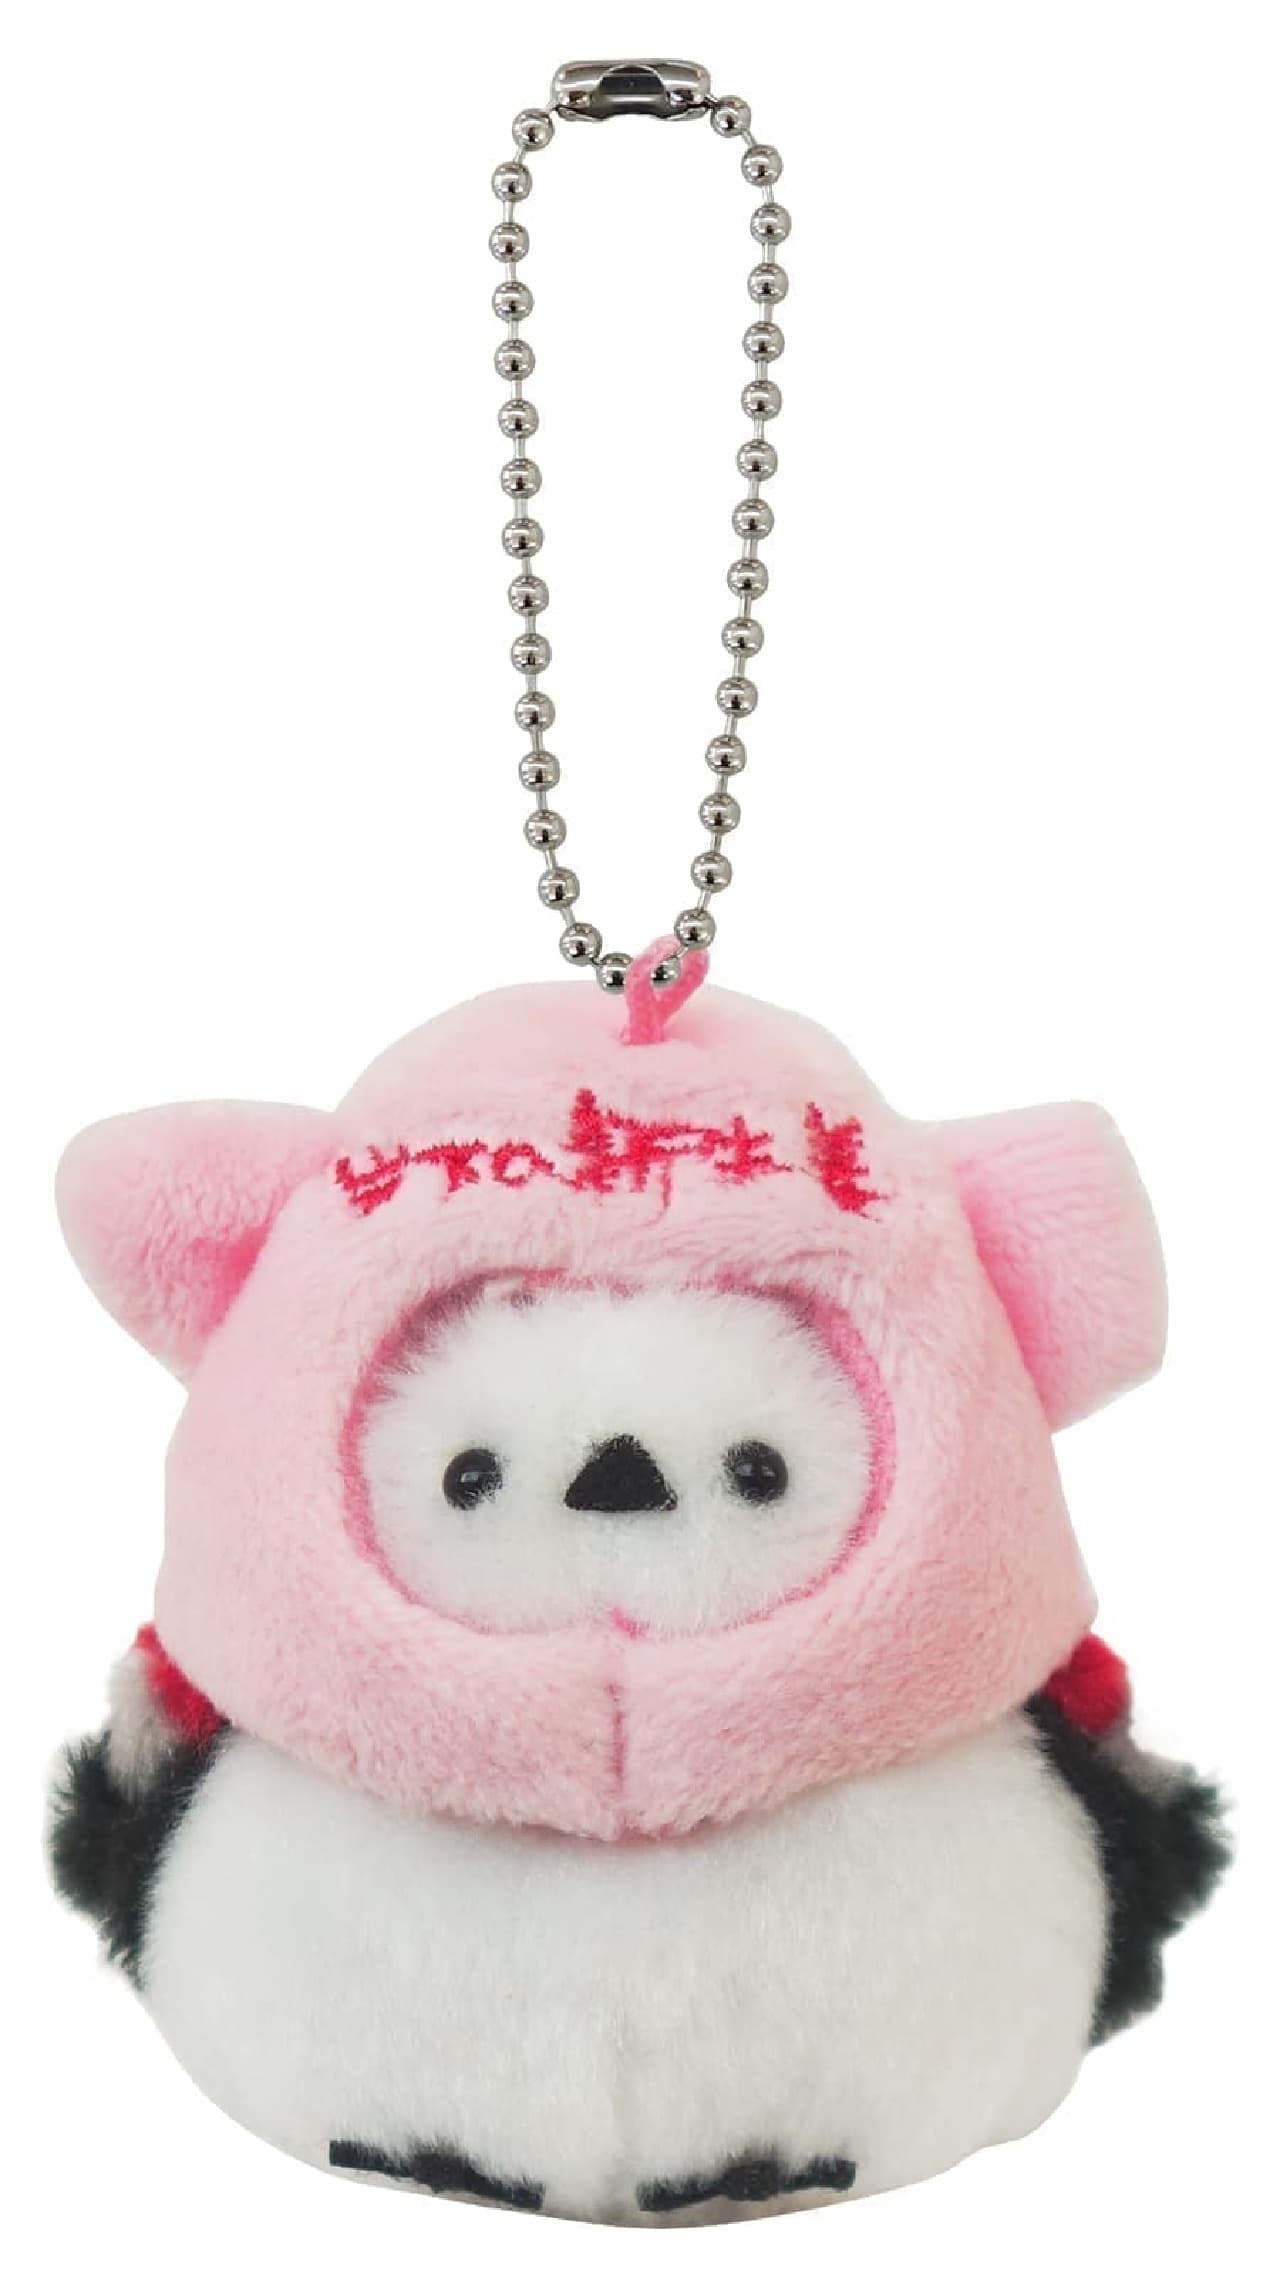 The second collaboration between Iwashita New Ginger and Koupen-Mr. Evil Enaga is also cute pink